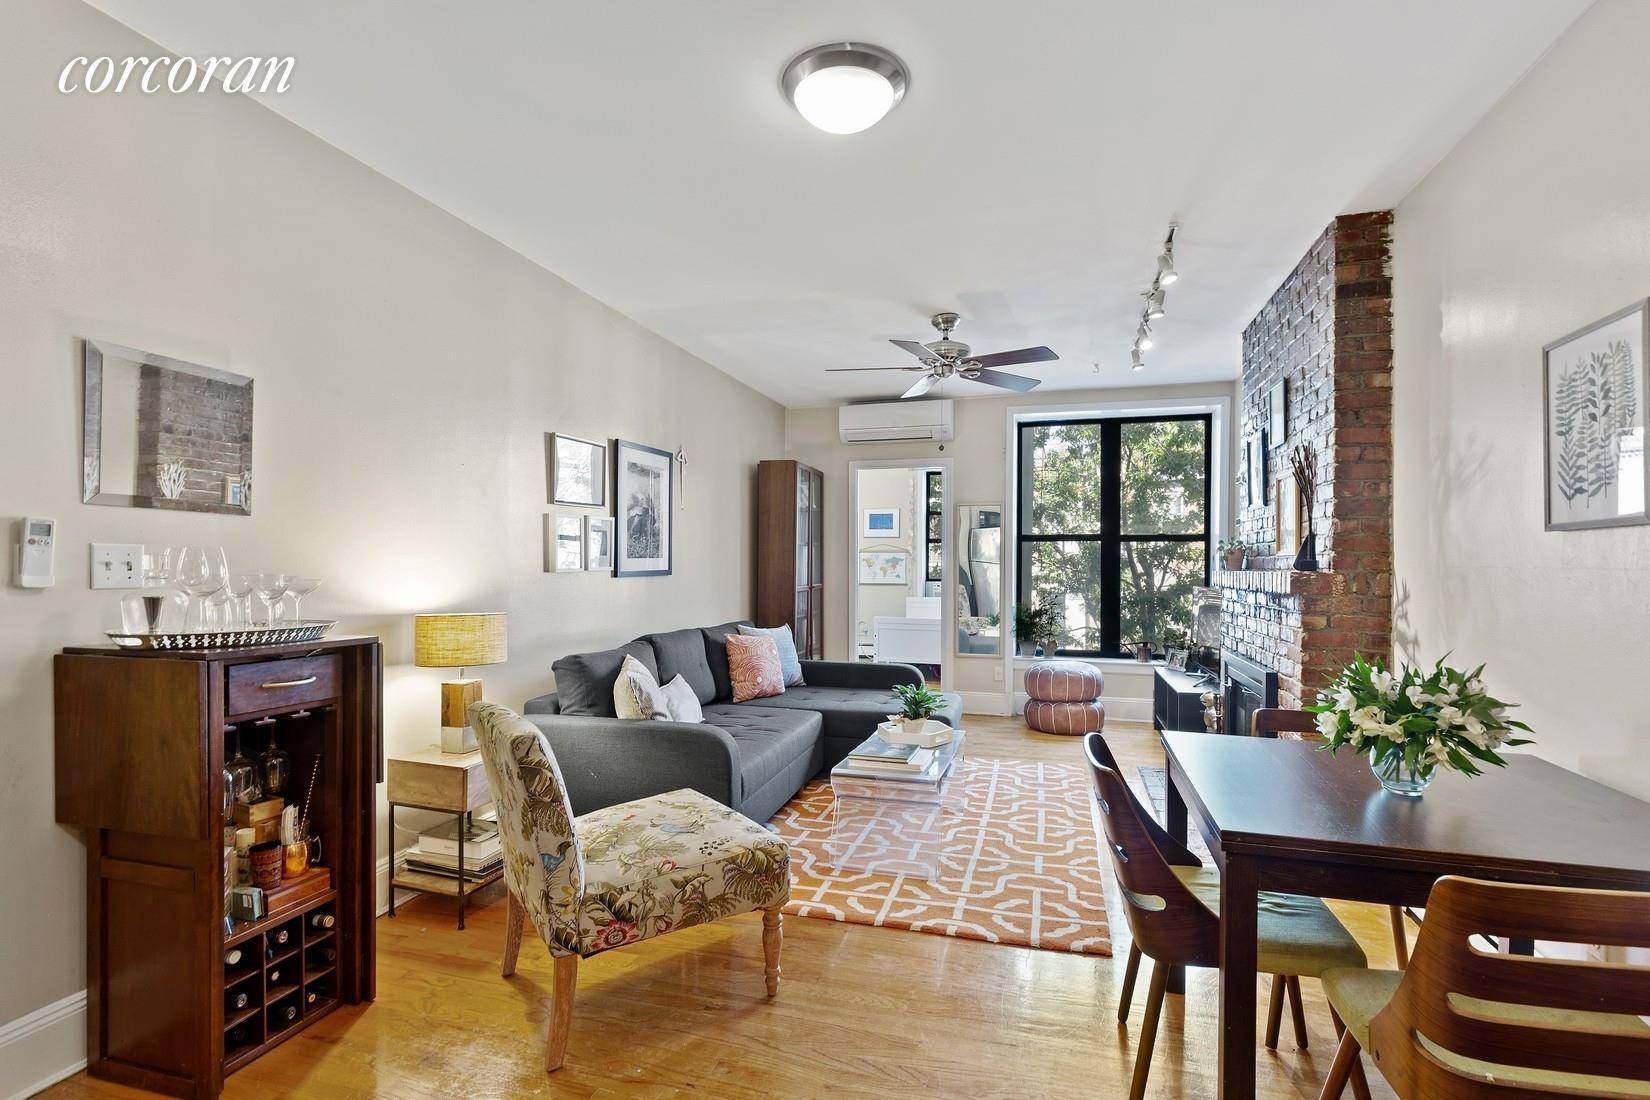 At the crossroads of Boerum Hill and Park Slope this lovely two bedroom, one bath apartment has a wonderful feel and a great layout that maximizes every inchA no space ...